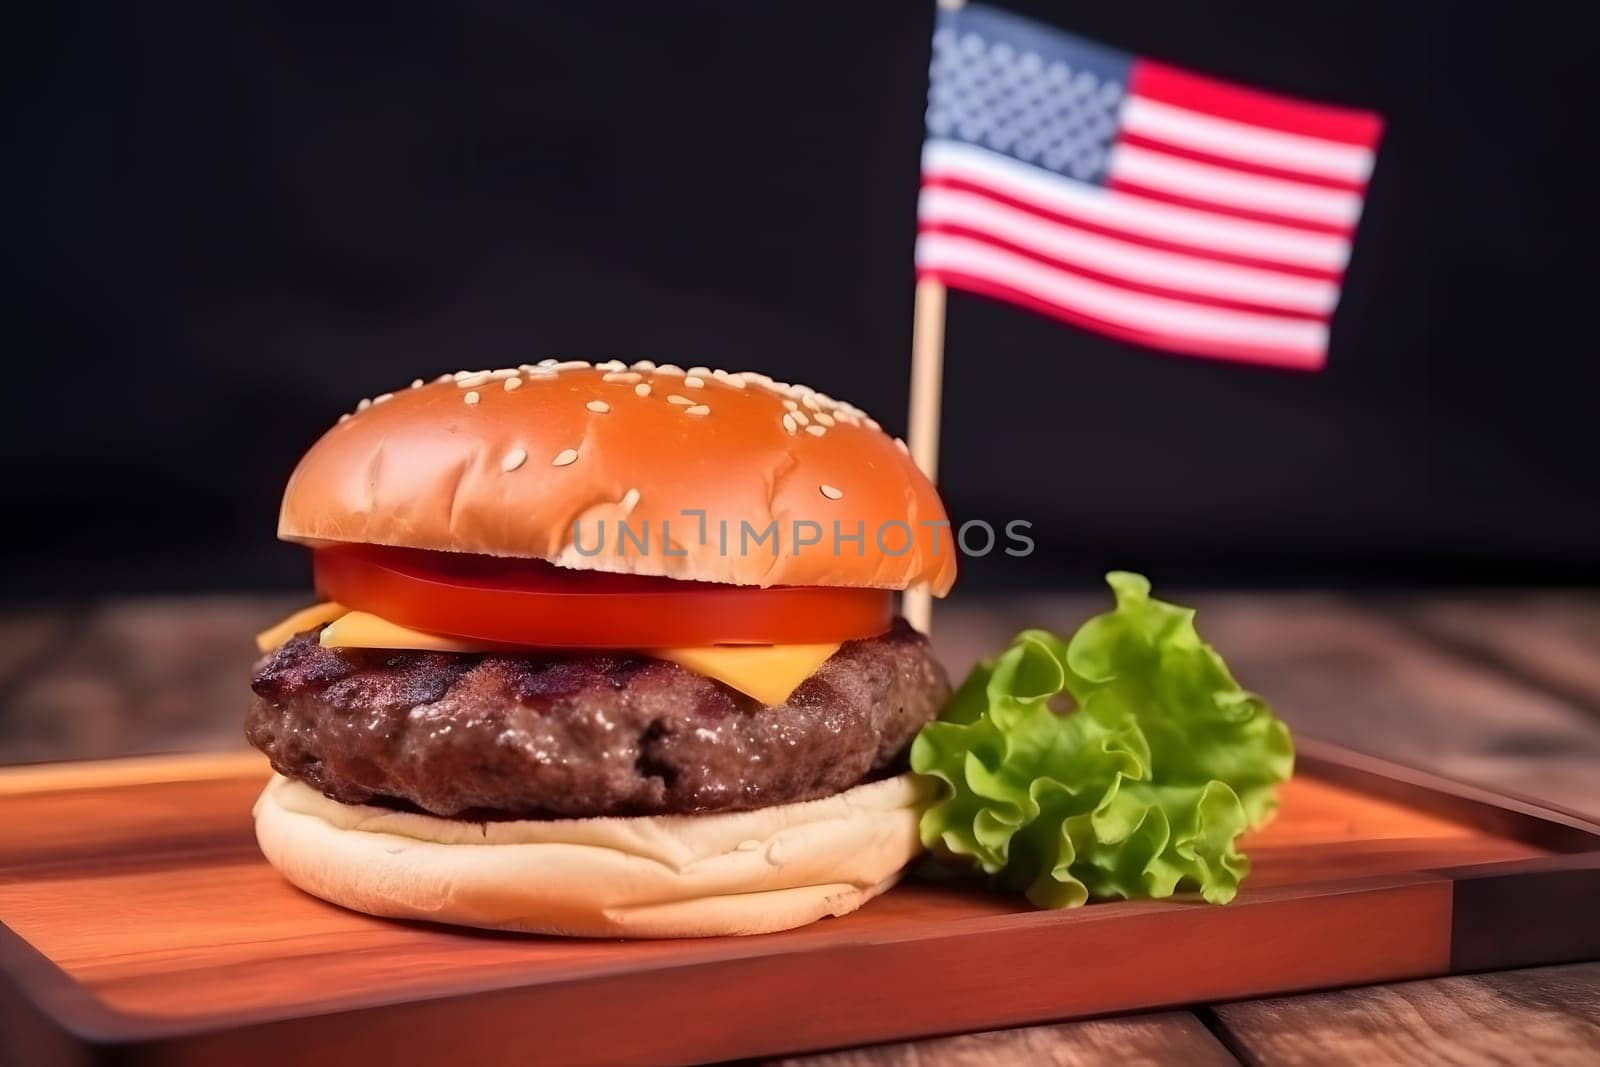 small hamburger with small american flag on it, dark background, US patriotic proud theme. Neural network generated in May 2023. Not based on any actual scene or pattern.